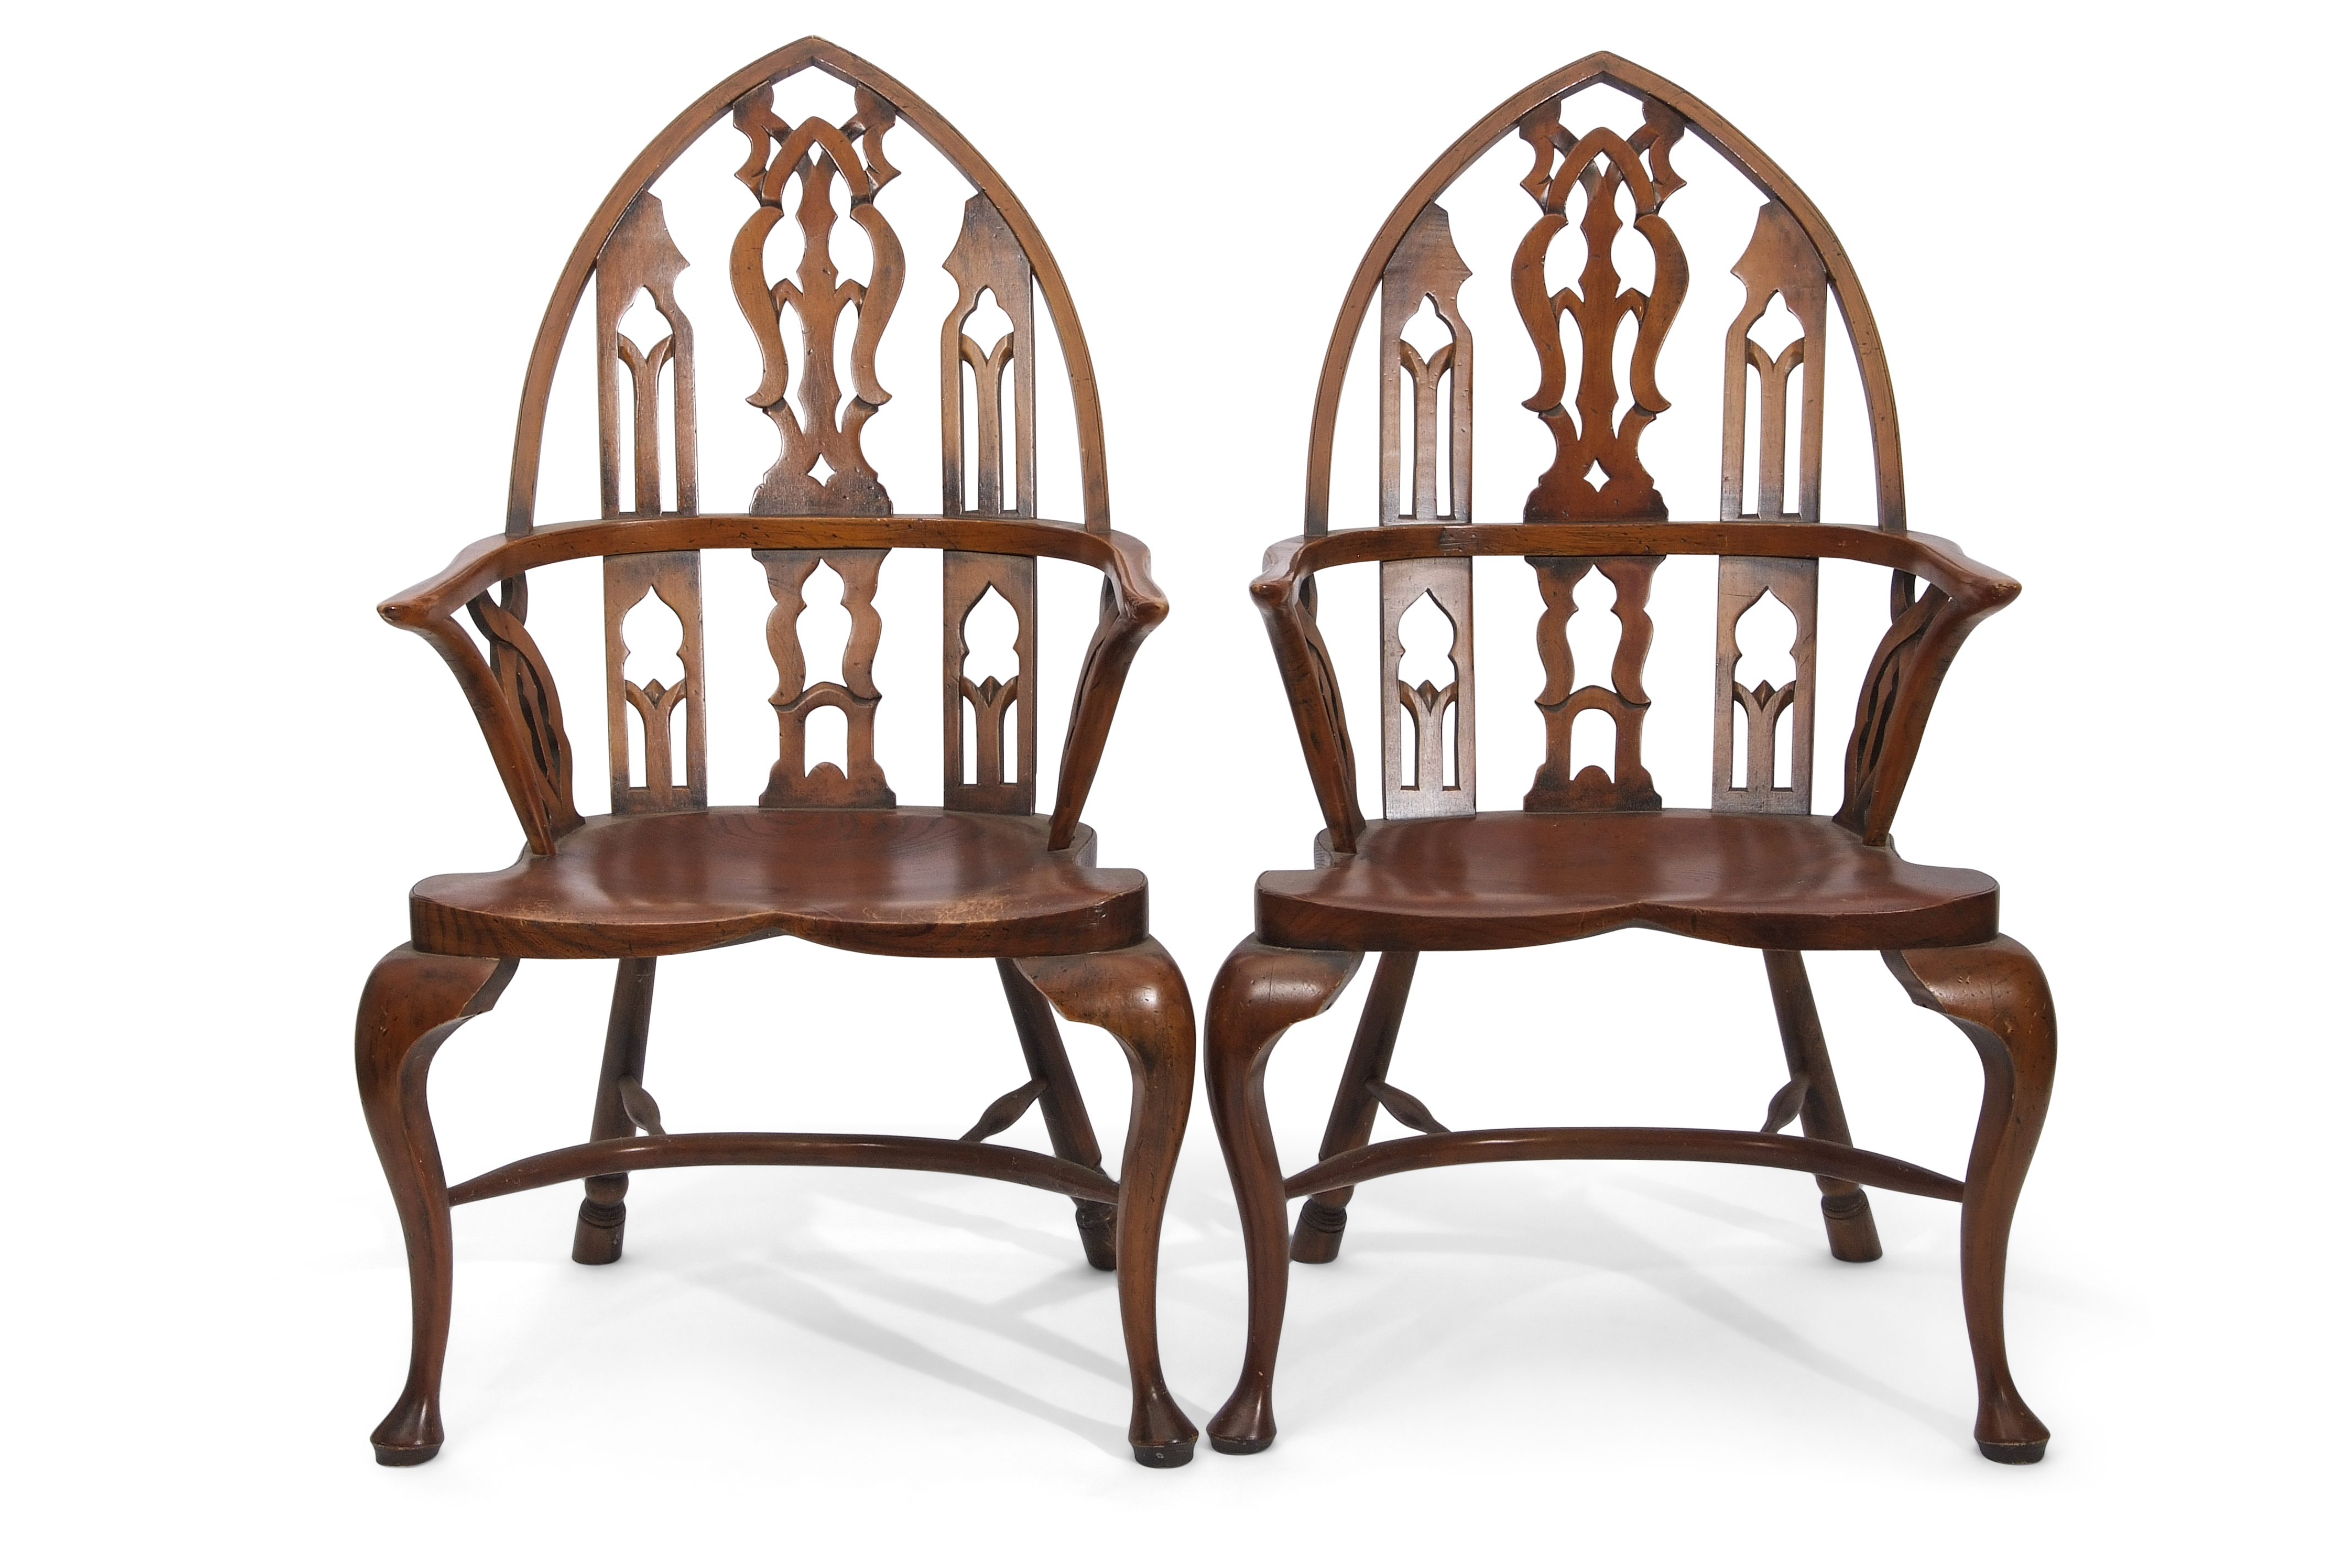 Set of five unusual Windsor chairs, the yew tops with lancet shaped backs and pierced central